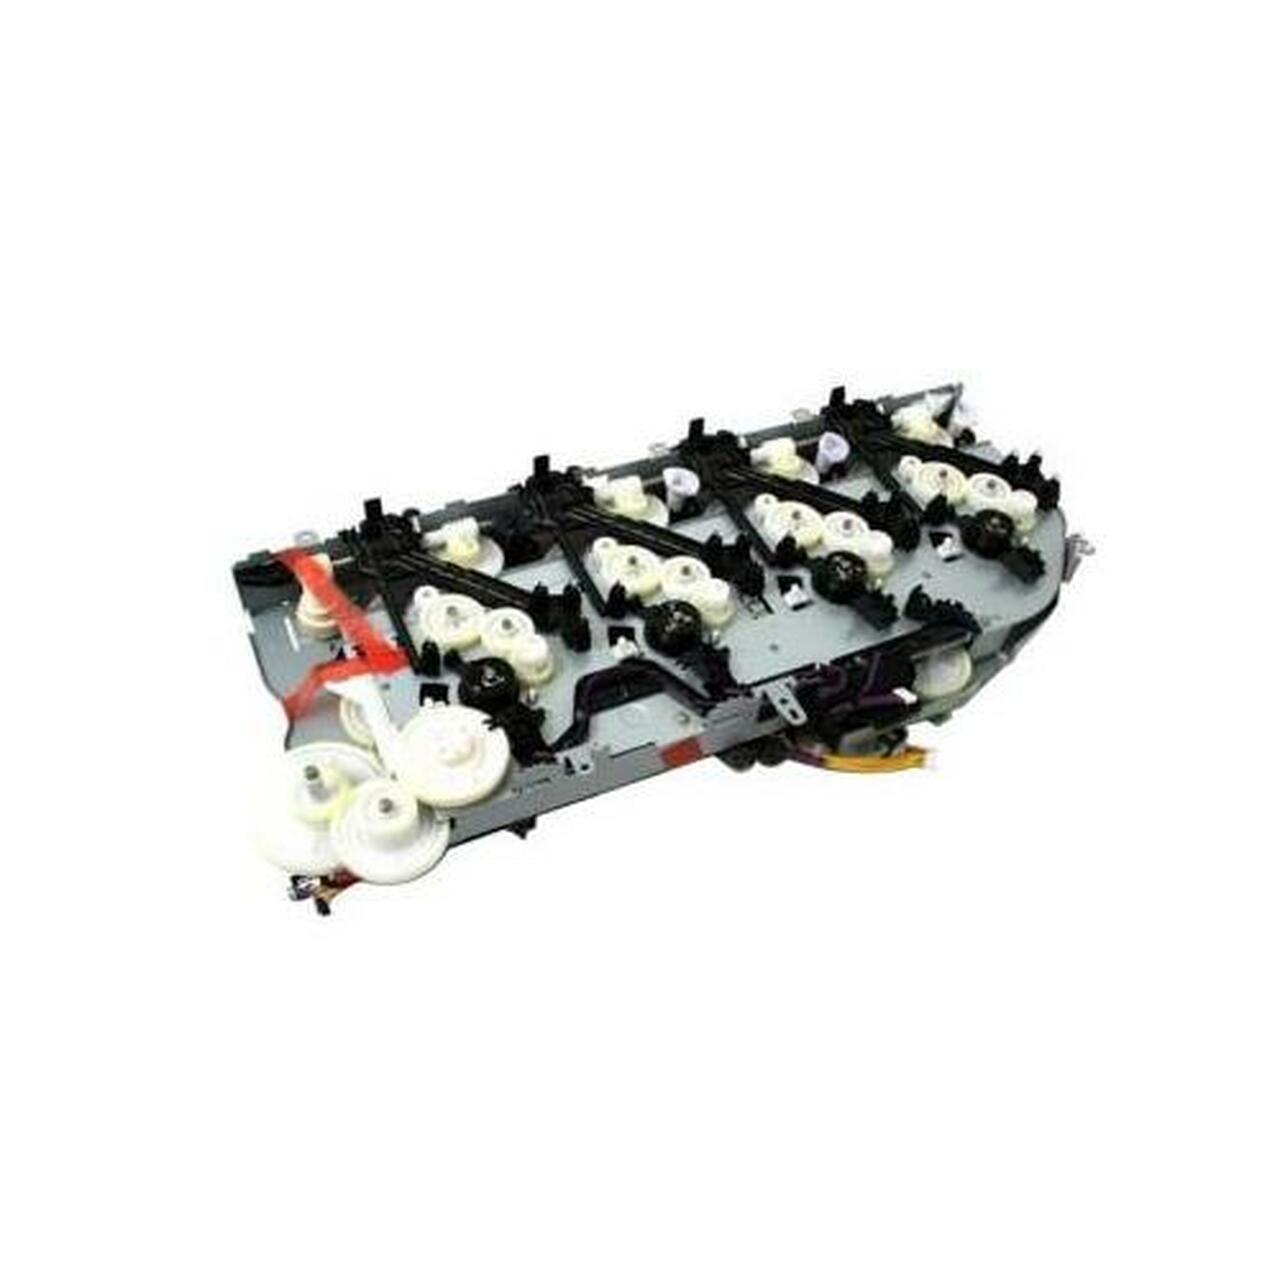 HP OEM CE708-67901 (RM2-5832-000) Duplex Model Only Main Drive Assembly